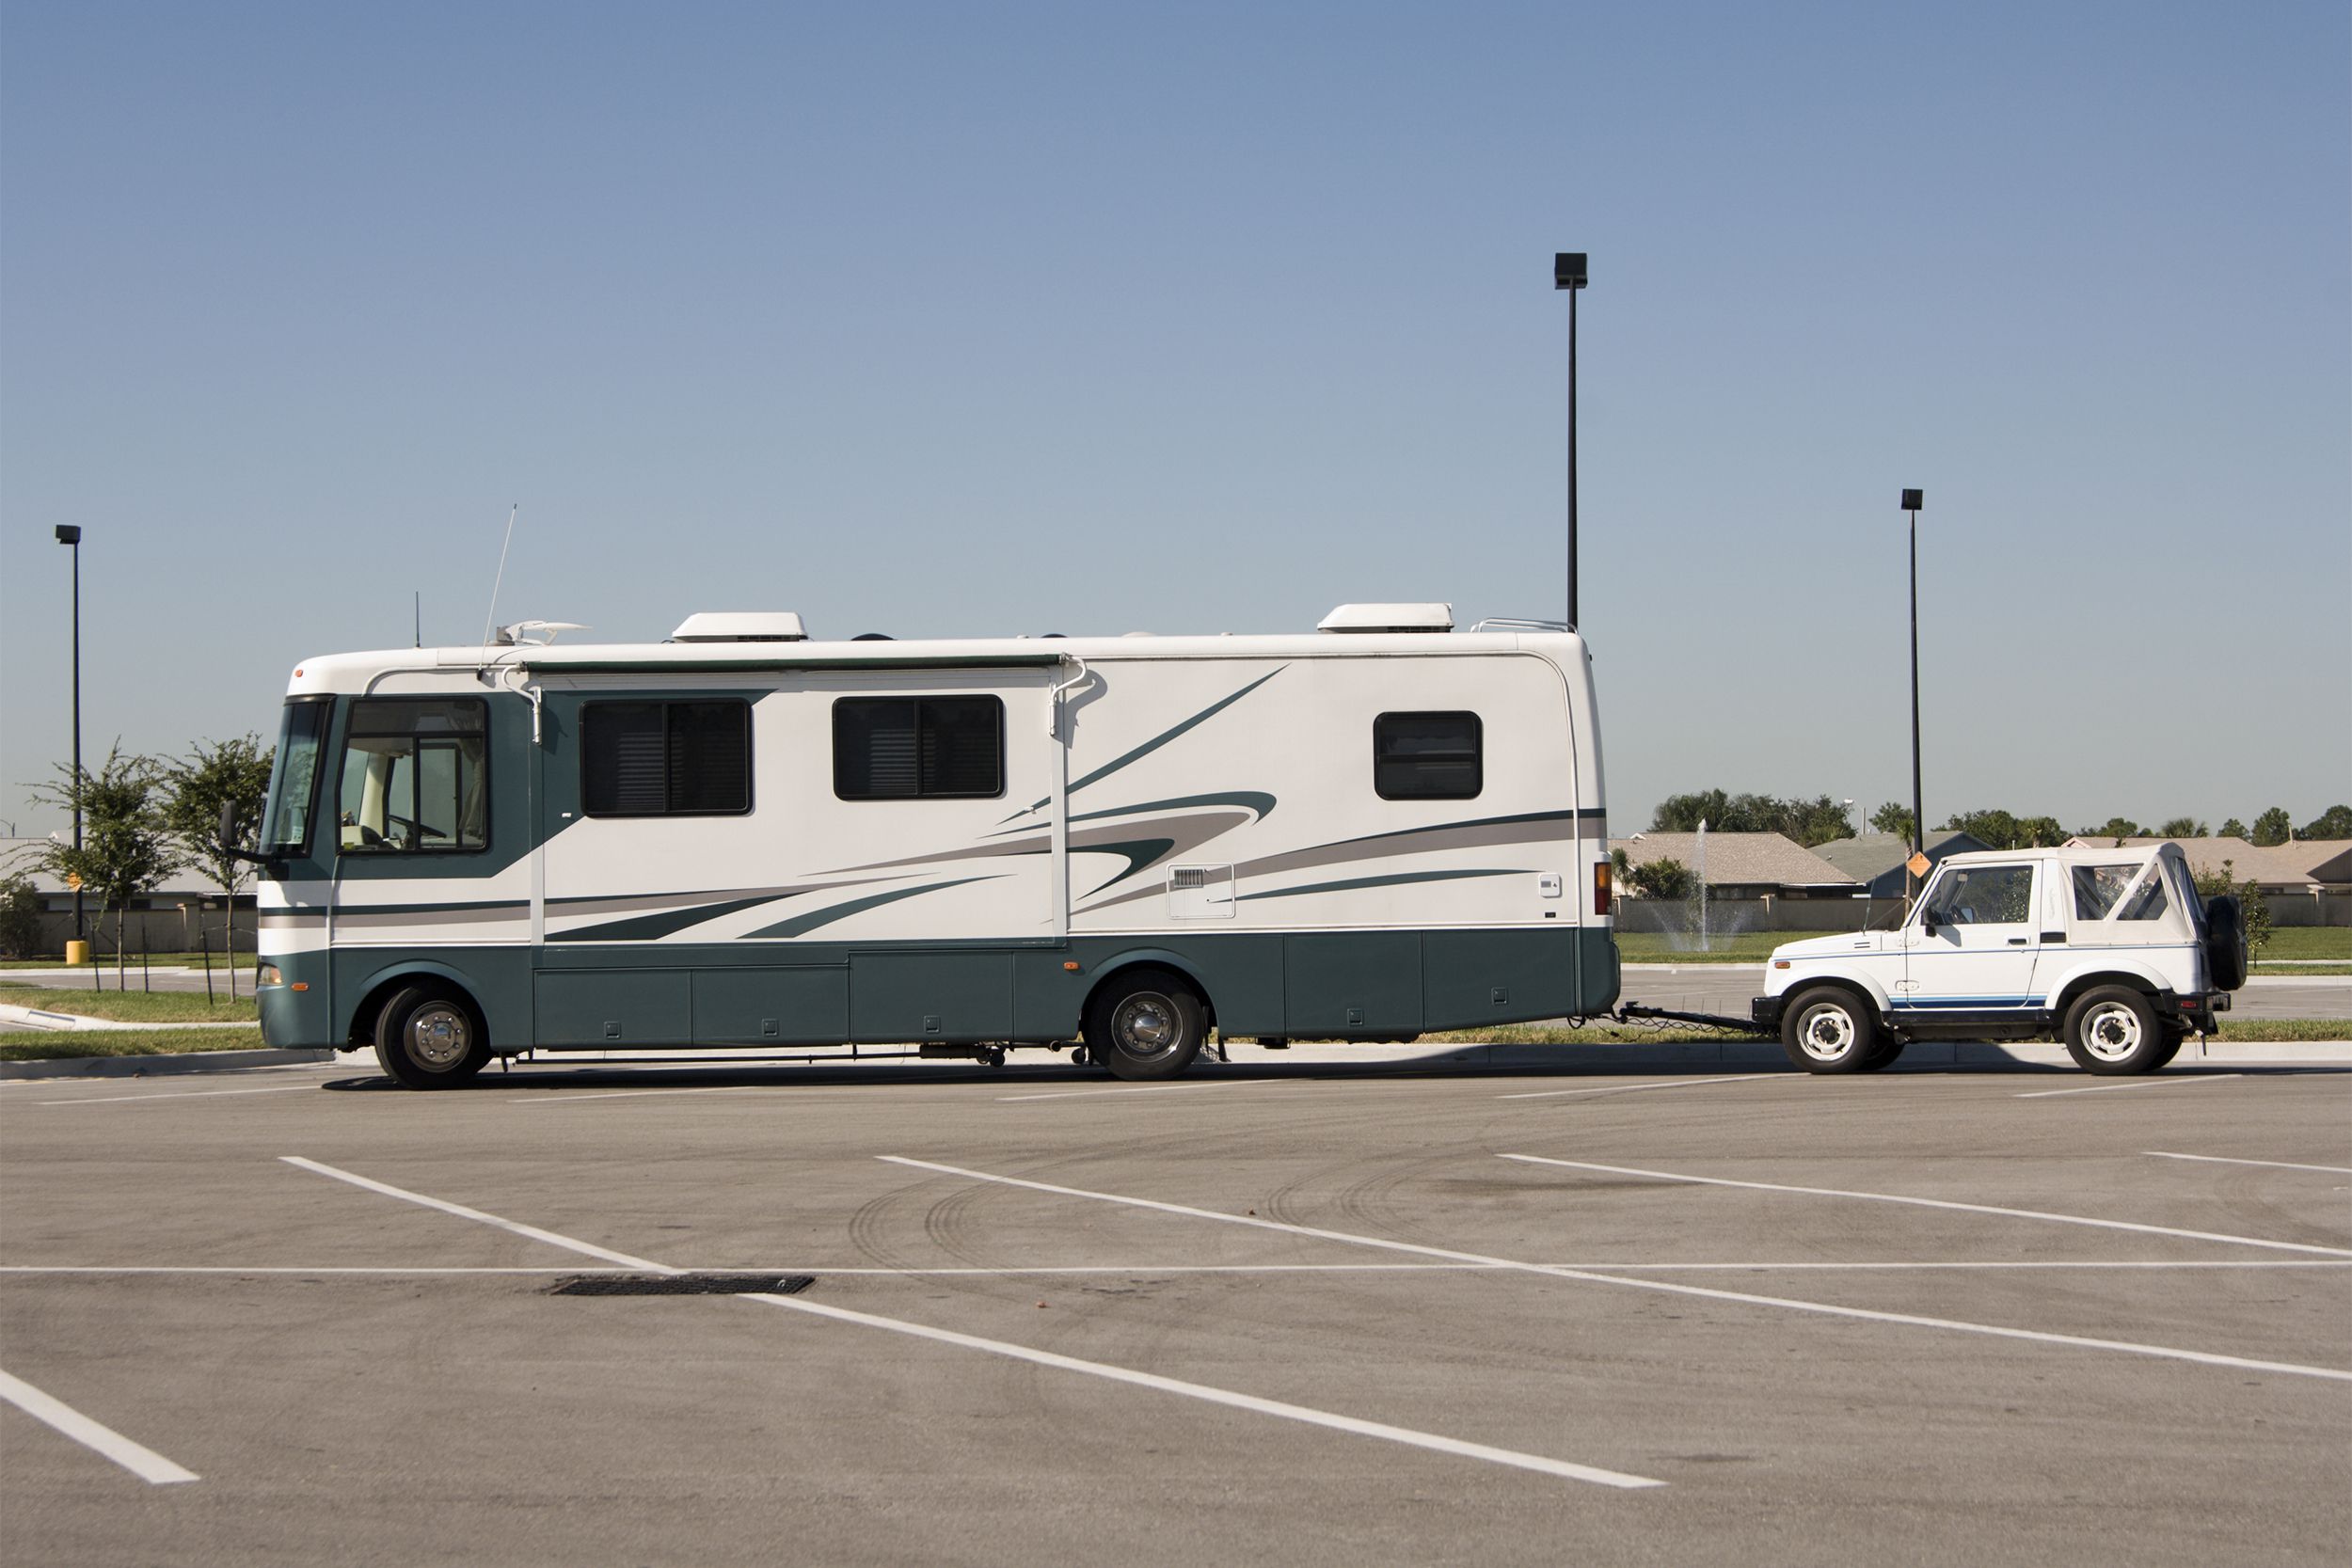 <p>Available in either gas or diesel, Class A motorhomes are the <a href="https://blog.cheapism.com/amazing-celebrity-rvs/">biggest, swankiest, most feature-packed RVs</a> on the road. At a glance, they look like giant bus-shaped rectangles on wheels and can range in length from about 21 feet to 41 feet or more.</p><p><b>For more great RV articles, lifestyle stories, and money-saving tips, <a href="https://cheapism.us14.list-manage.com/subscribe?u=de966e79b38e1d833d5781074&id=c14db36dd0">please sign up for Cheapism's free newsletters</a>.</b></p>